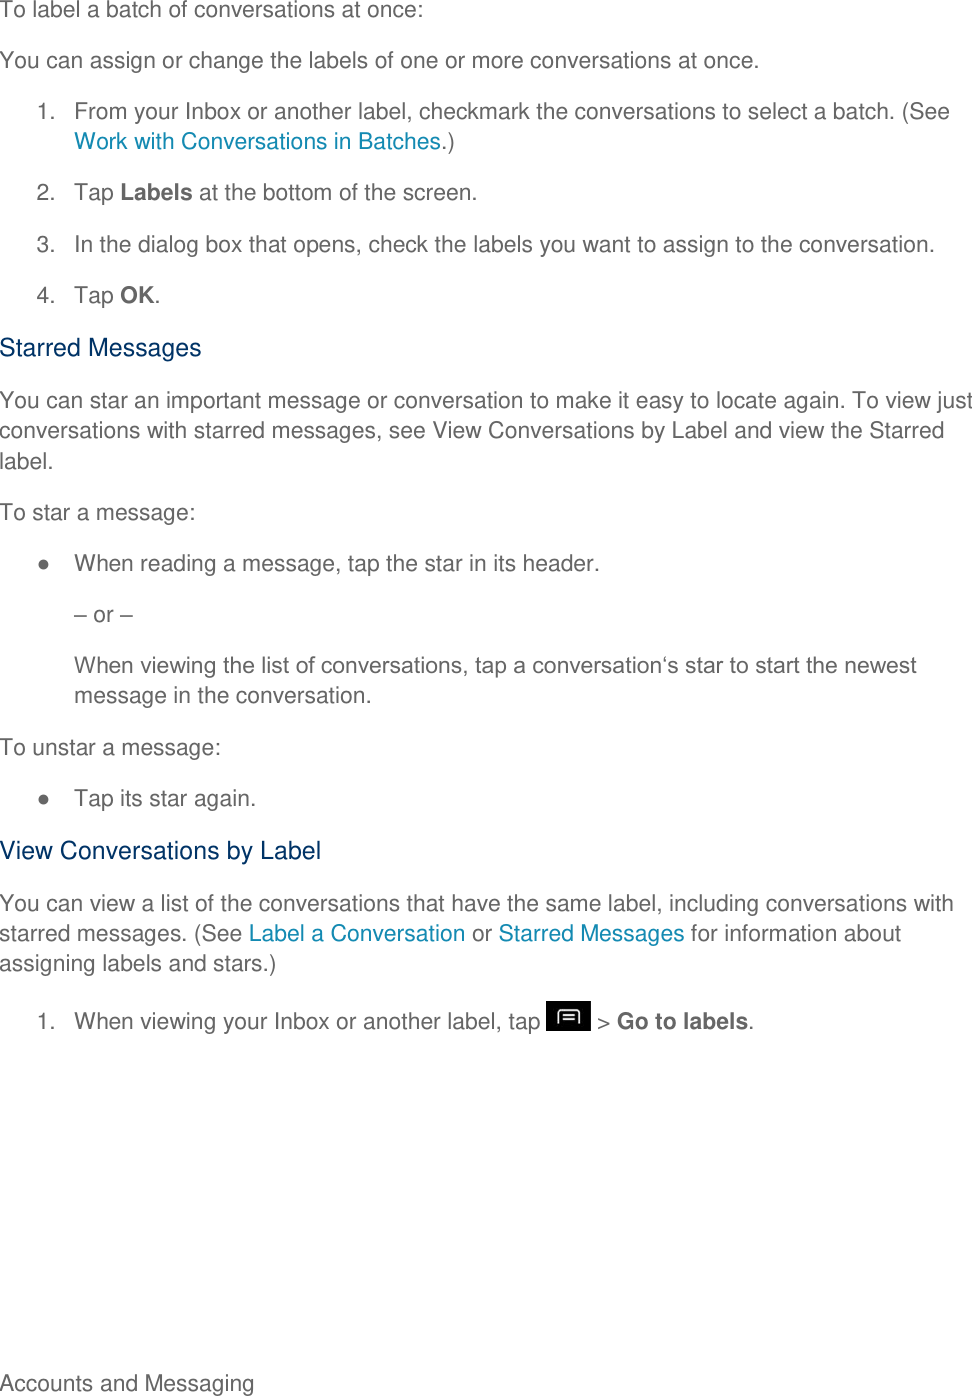 Accounts and Messaging     To label a batch of conversations at once: You can assign or change the labels of one or more conversations at once. 1.  From your Inbox or another label, checkmark the conversations to select a batch. (See Work with Conversations in Batches.) 2.  Tap Labels at the bottom of the screen. 3.  In the dialog box that opens, check the labels you want to assign to the conversation. 4.  Tap OK. Starred Messages You can star an important message or conversation to make it easy to locate again. To view just conversations with starred messages, see View Conversations by Label and view the Starred label. To star a message:   When reading a message, tap the star in its header.  or  message in the conversation. To unstar a message:   Tap its star again. View Conversations by Label You can view a list of the conversations that have the same label, including conversations with starred messages. (See Label a Conversation or Starred Messages for information about assigning labels and stars.) 1.  When viewing your Inbox or another label, tap   &gt; Go to labels. 